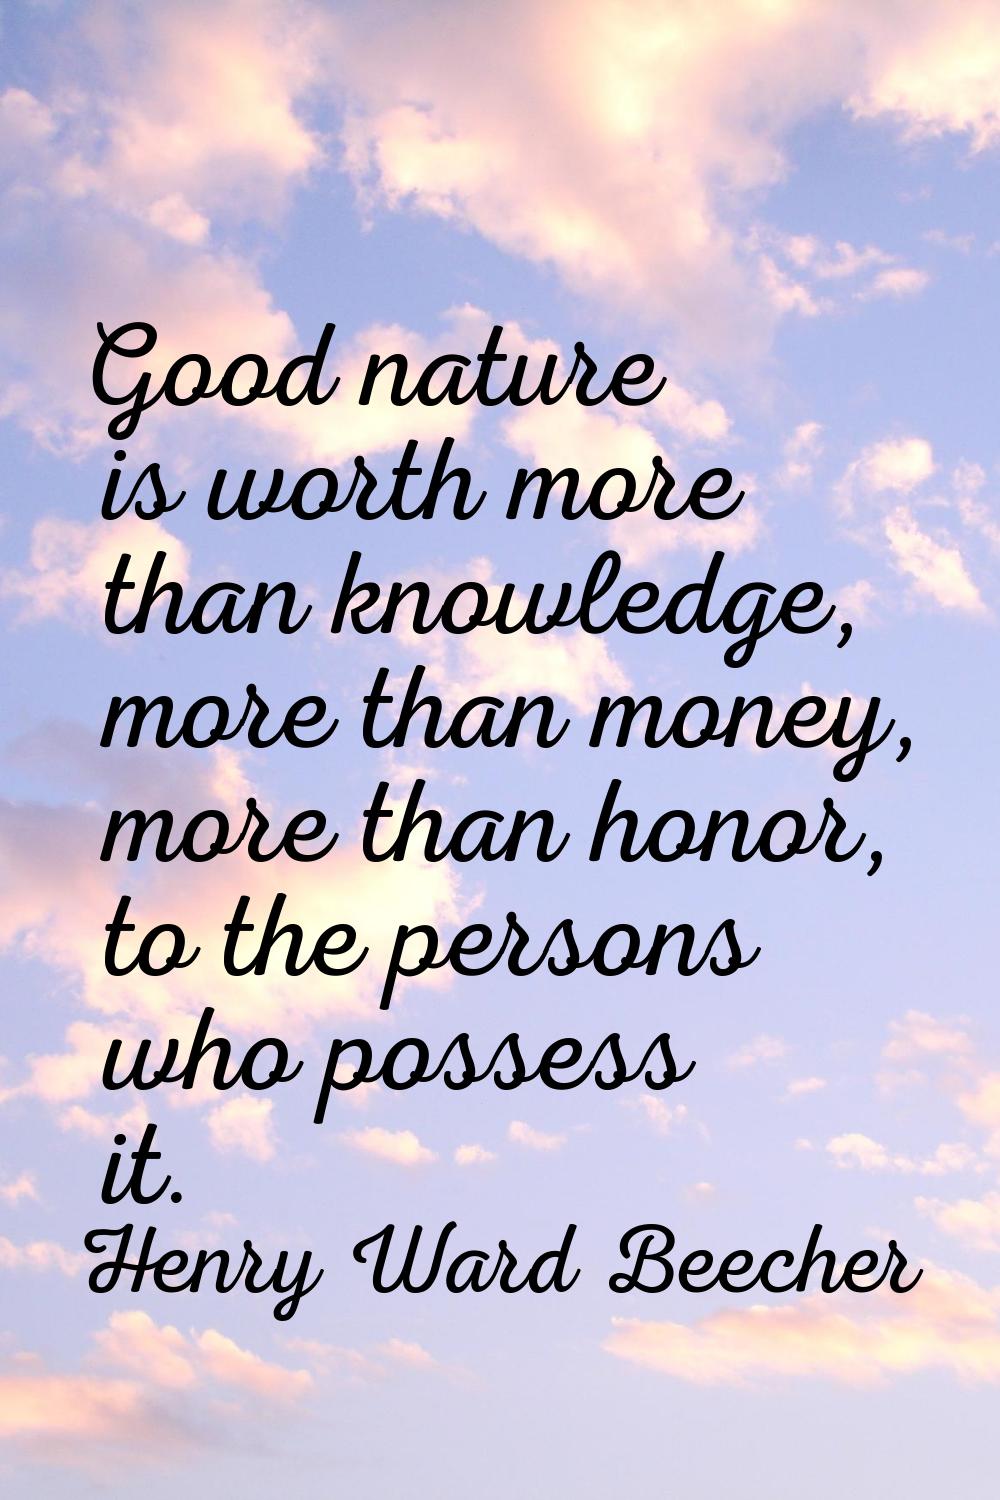 Good nature is worth more than knowledge, more than money, more than honor, to the persons who poss